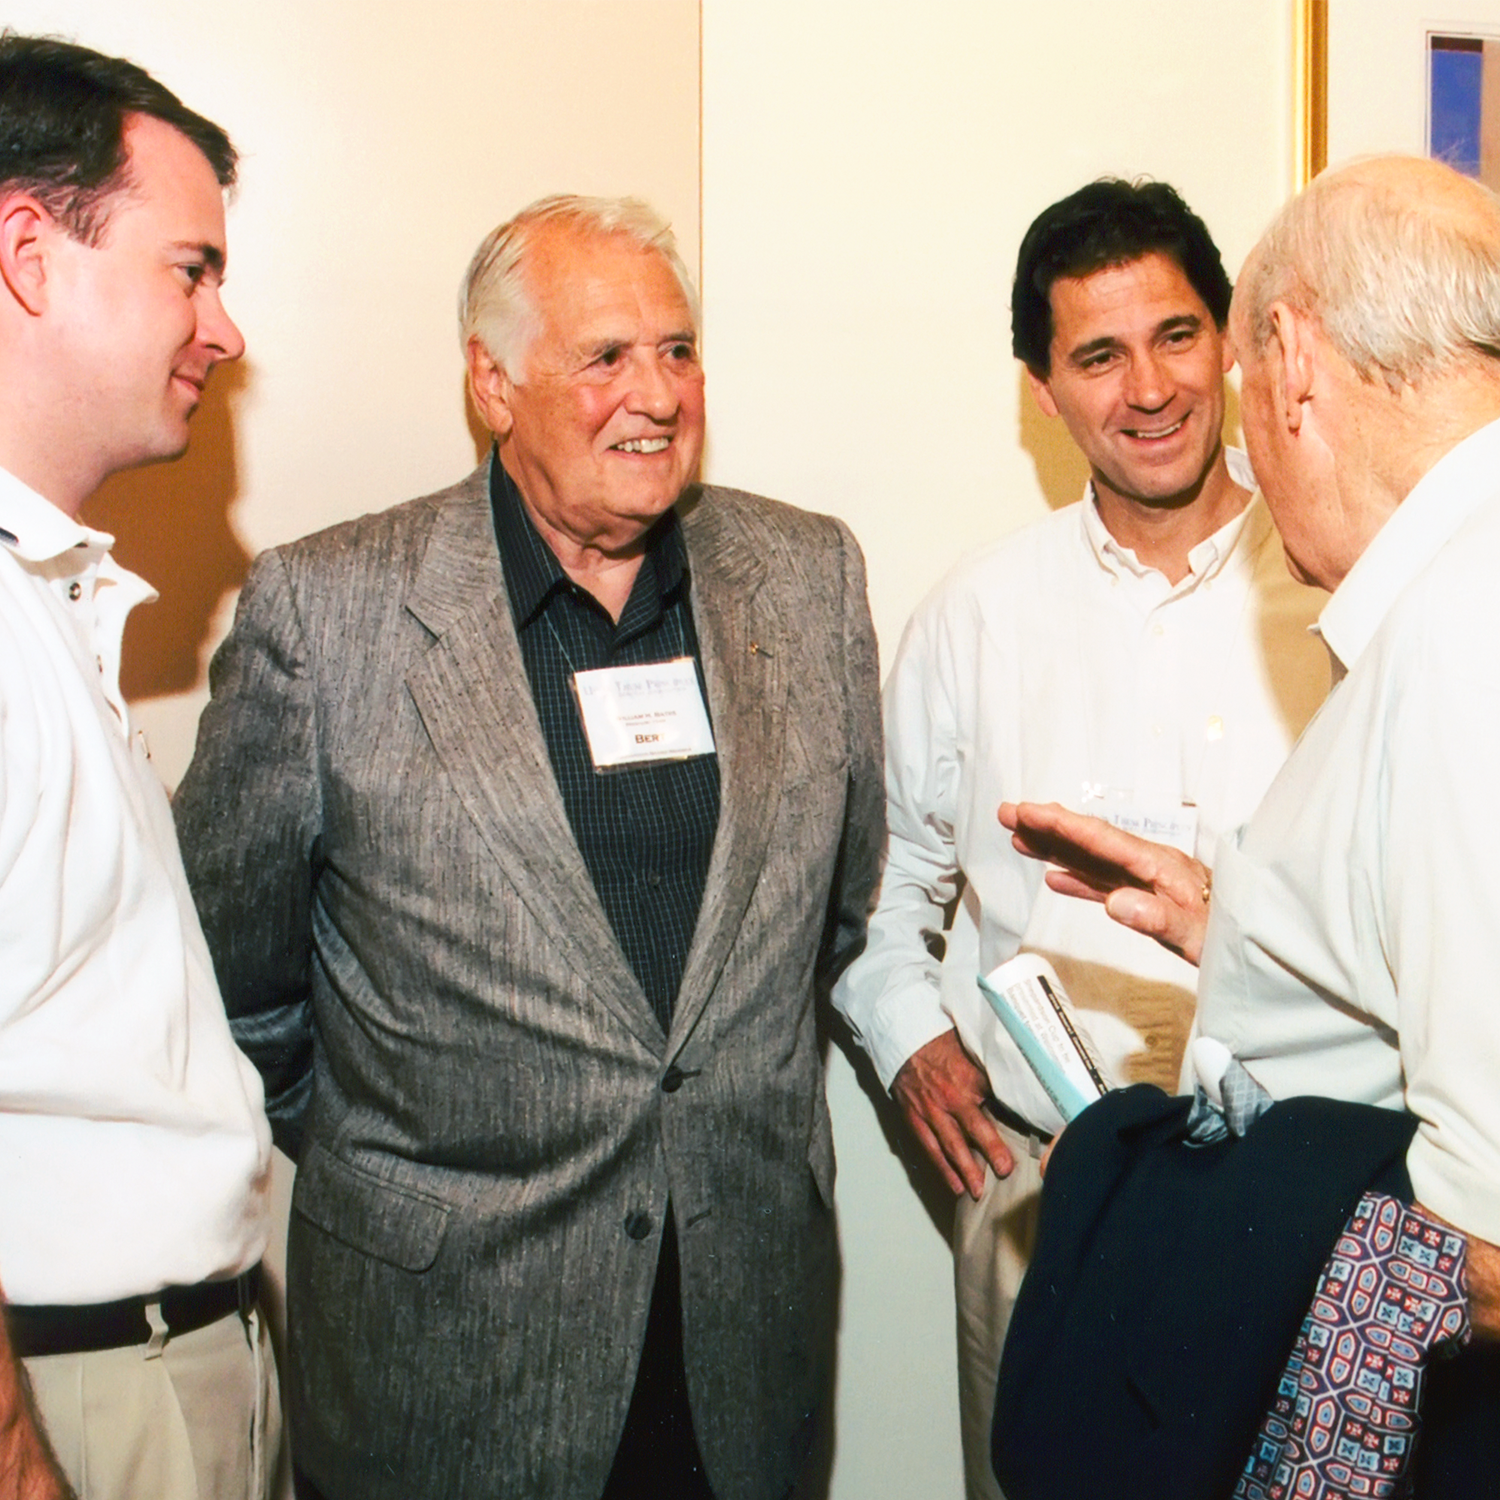 Bert Bates (second from left) speaks with Beta brothers at a Convention.